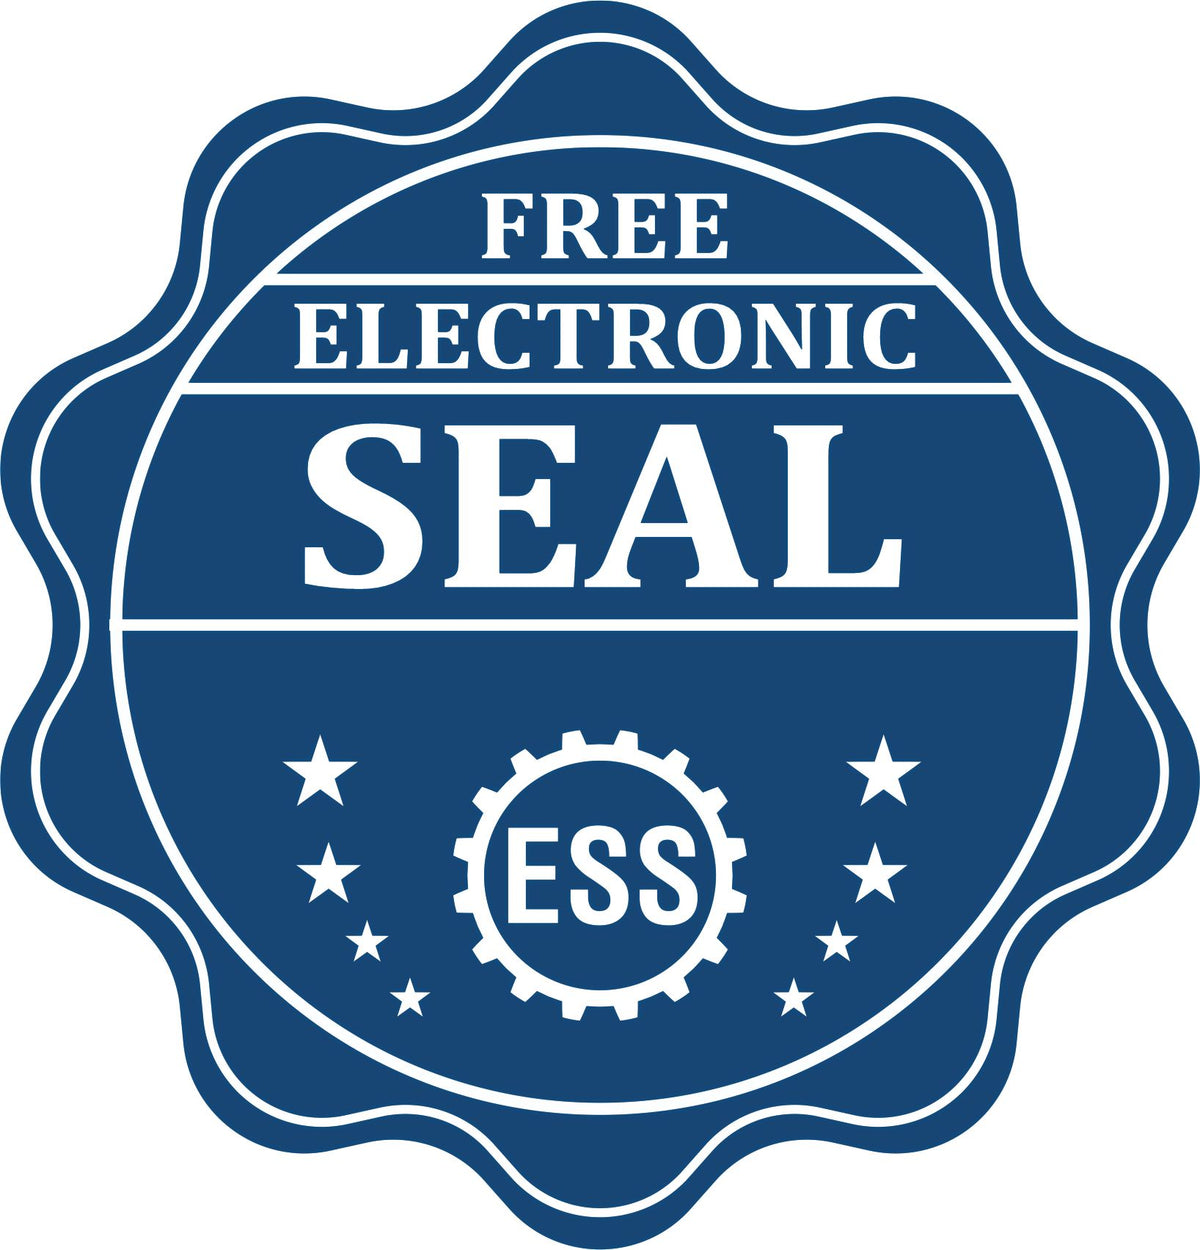 A badge showing a free electronic seal for the Slim Pre-Inked Michigan Landscape Architect Seal Stamp with stars and the ESS gear on the emblem.